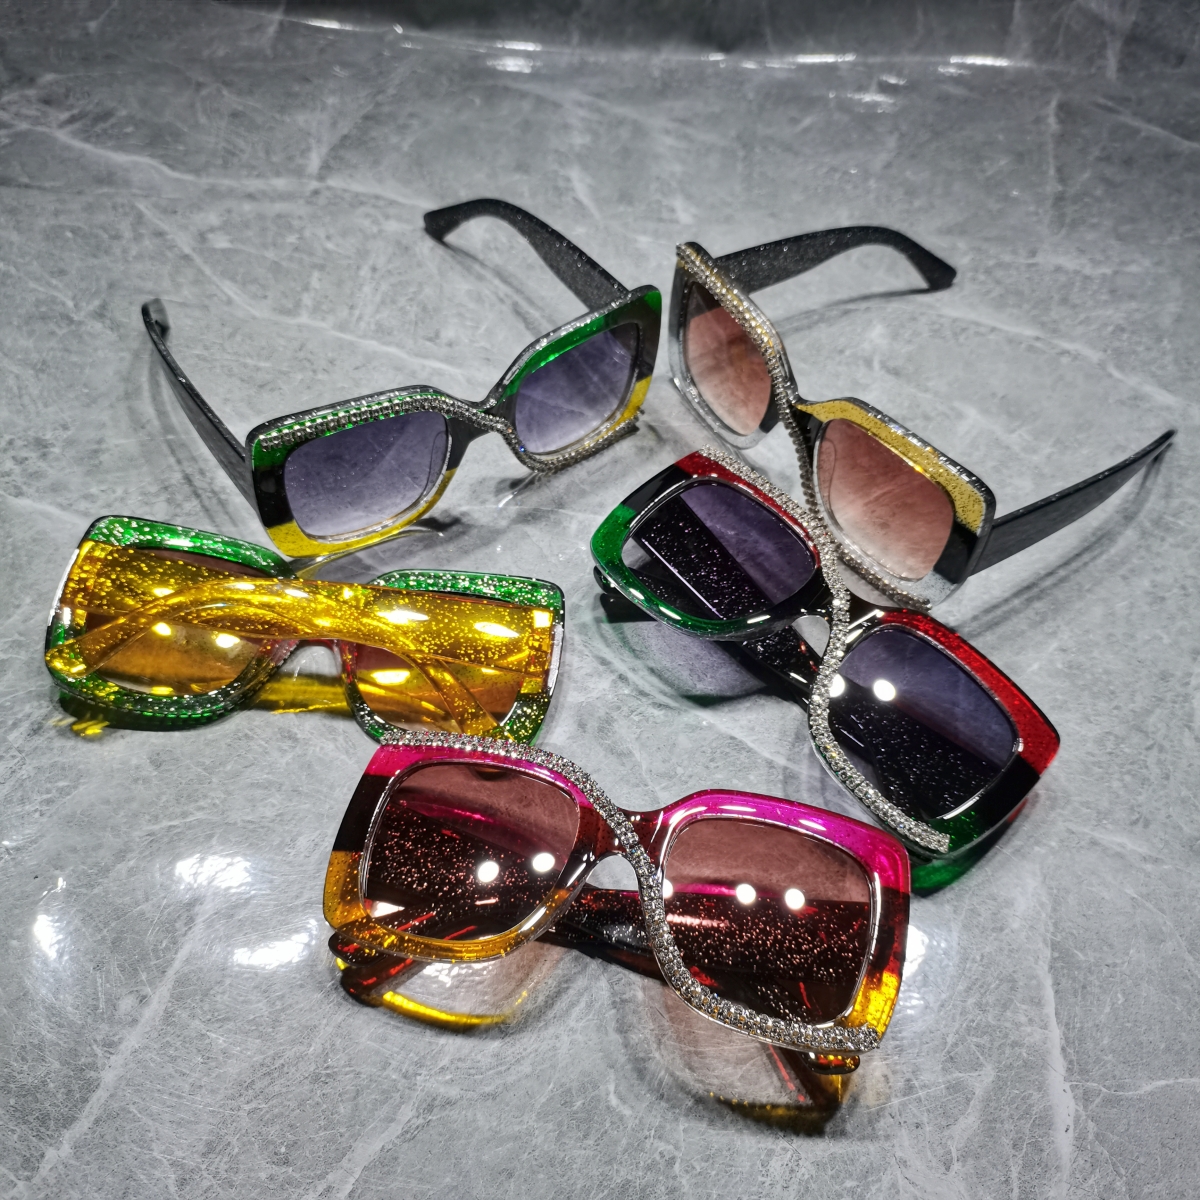 LOUIS VUITTON Square Spectacles And Sunglasses Color Club